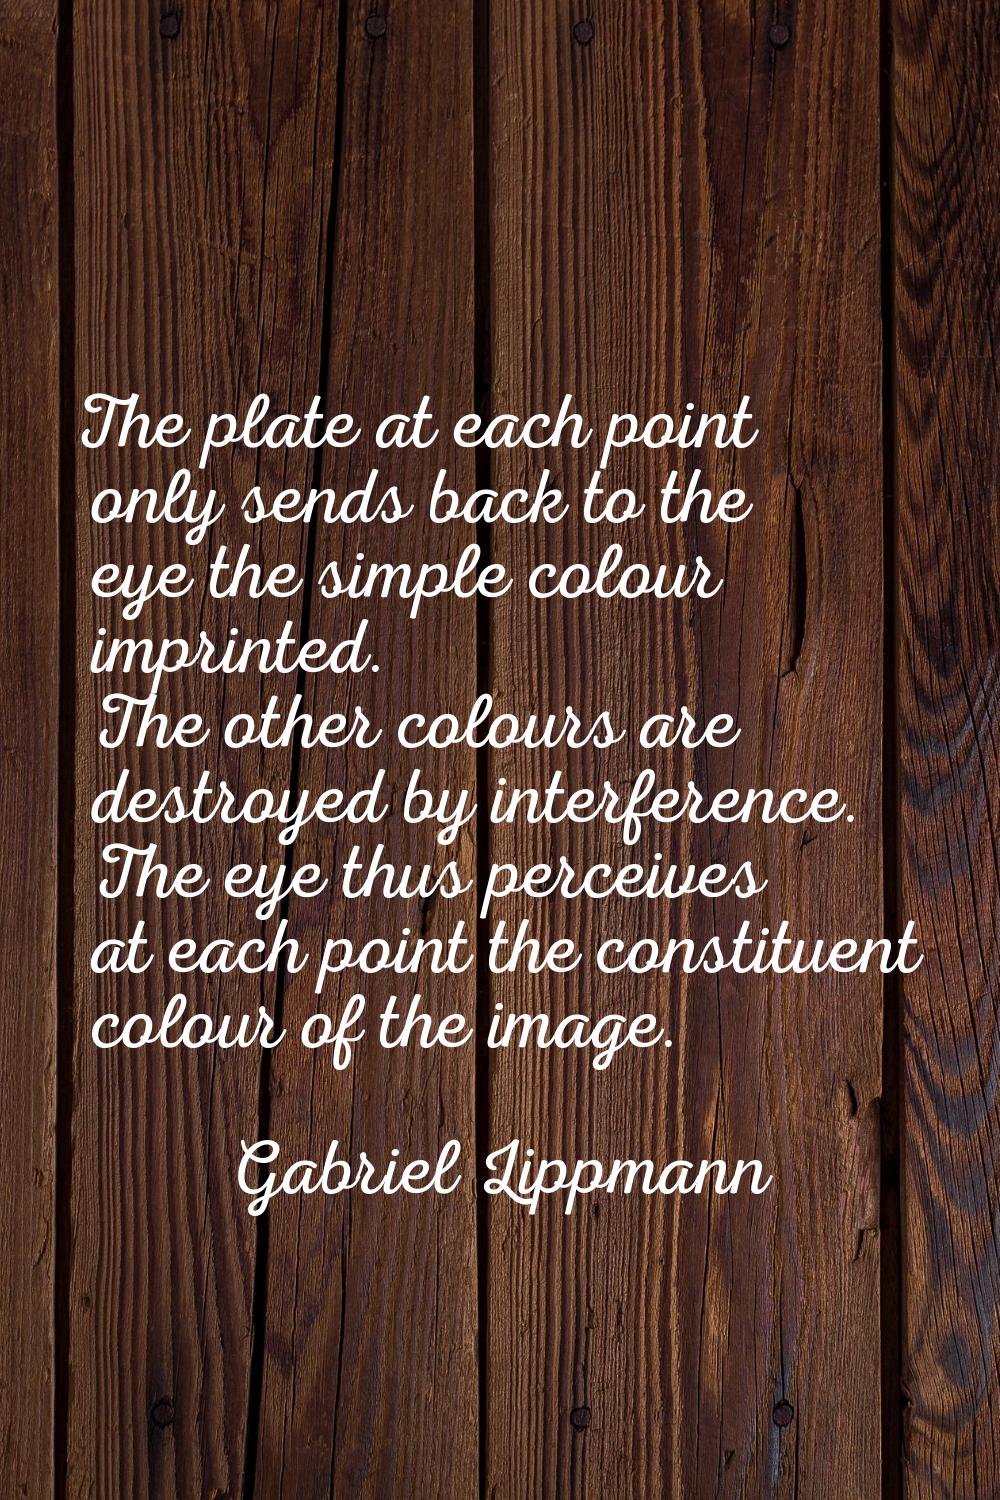 The plate at each point only sends back to the eye the simple colour imprinted. The other colours a